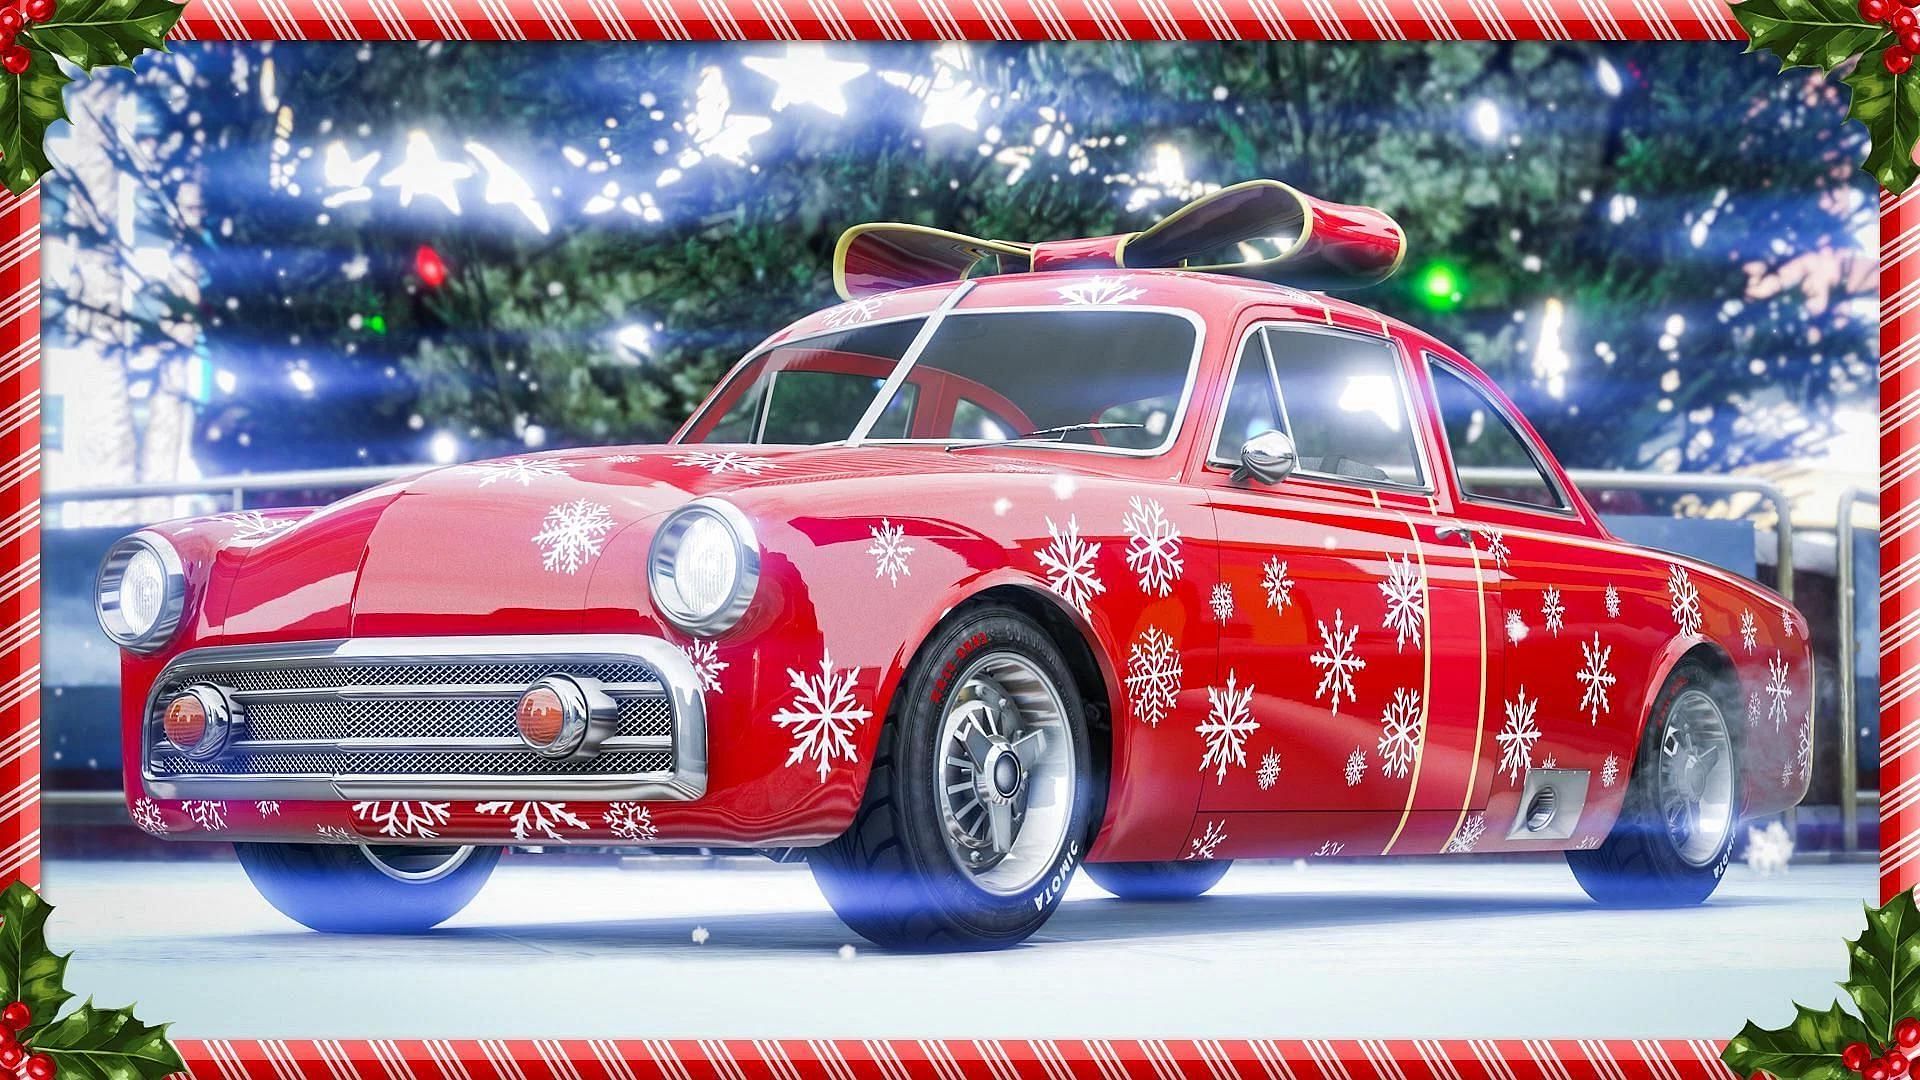 No free car for logging in this year: Fans react to GTA Online Festive  Surprise Christmas gifts of 2022